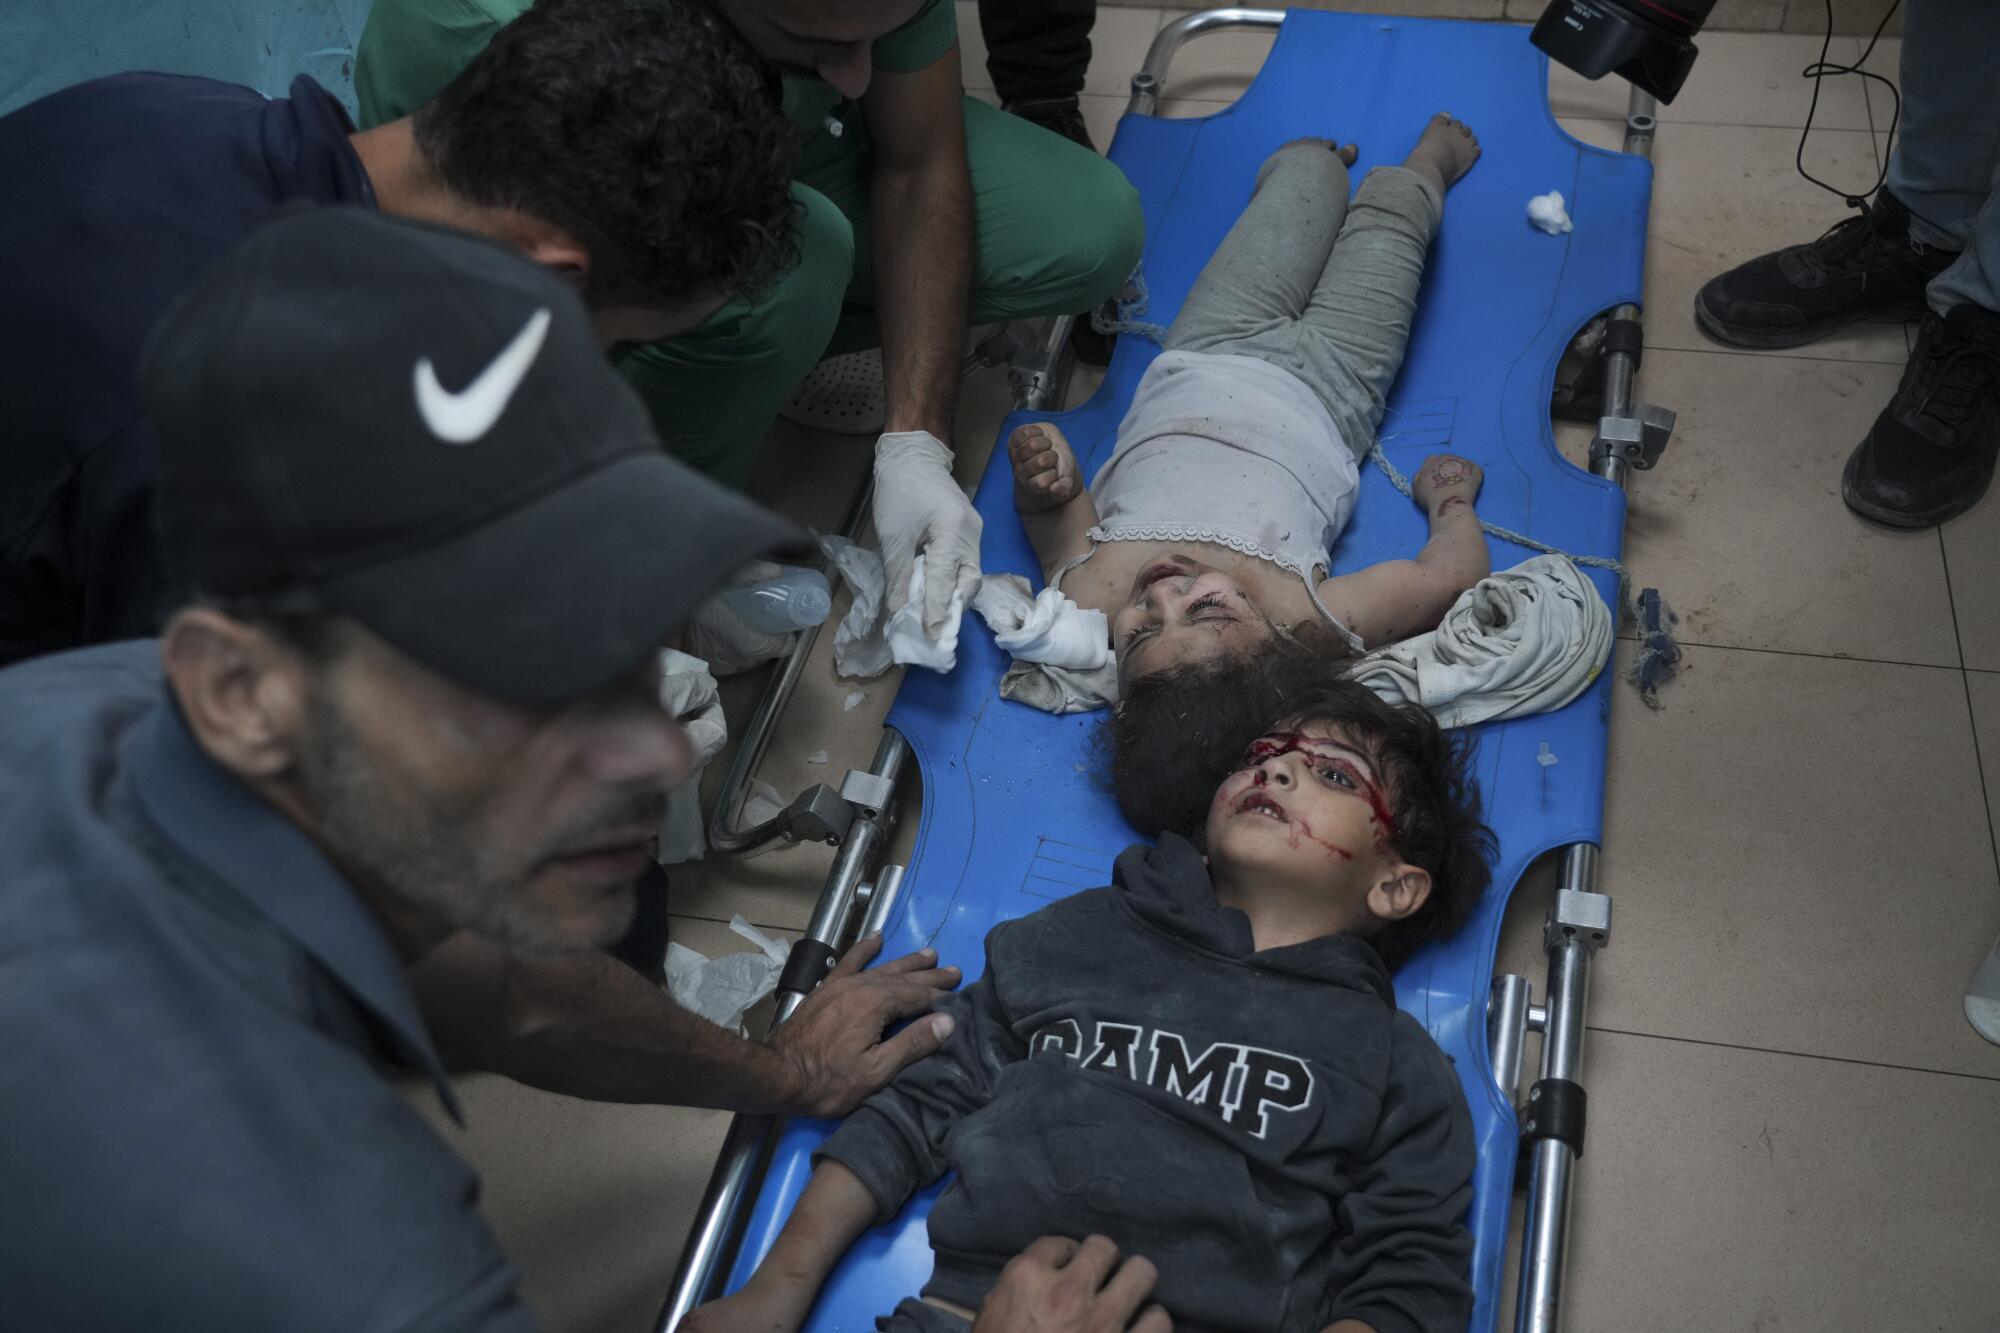 Two young children, one with blood on the face, lie on a blue stretcher as other people tend to them